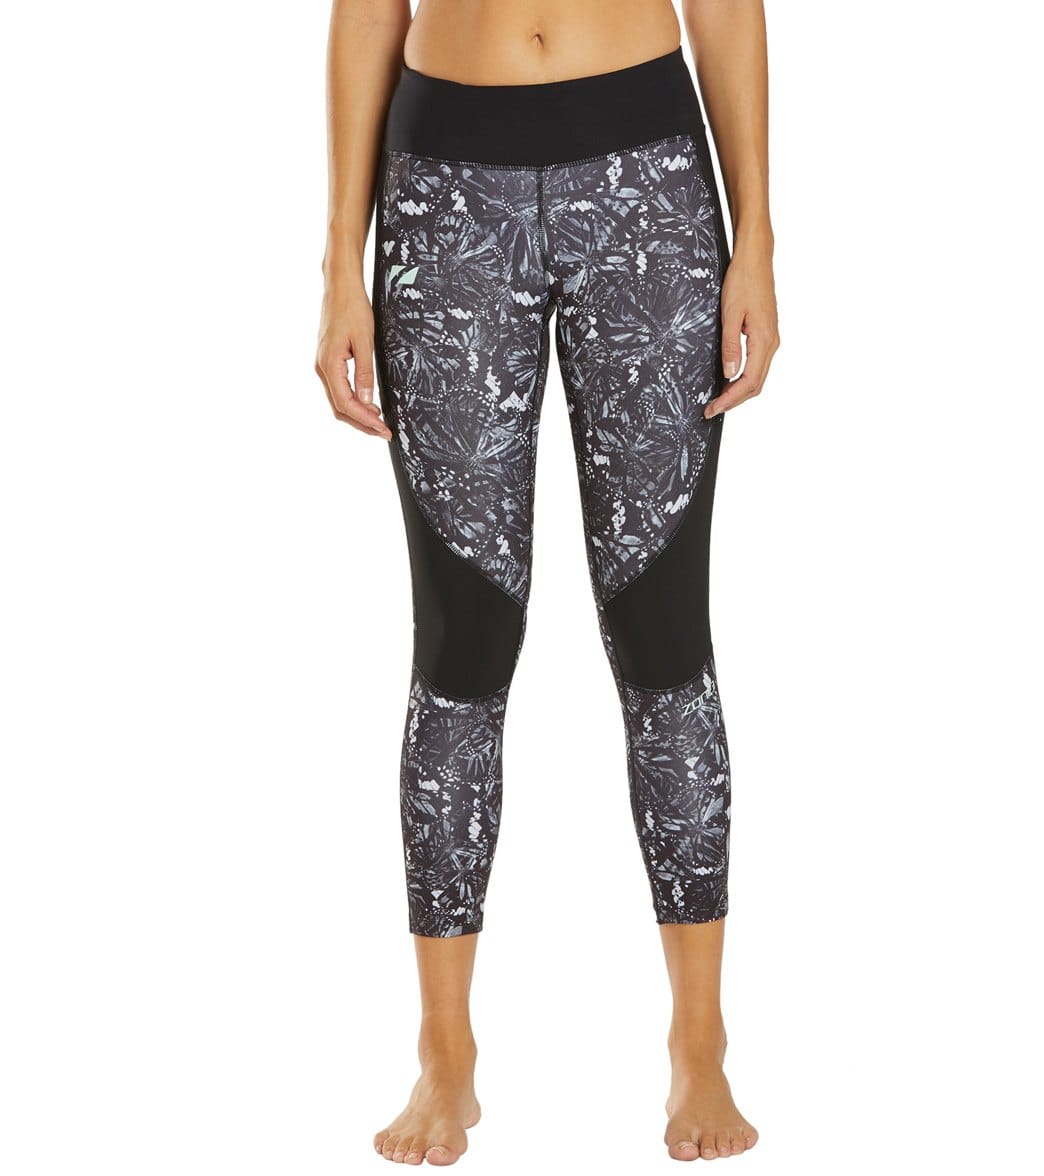 Zone3 Women's 7/8 Compression Tights at